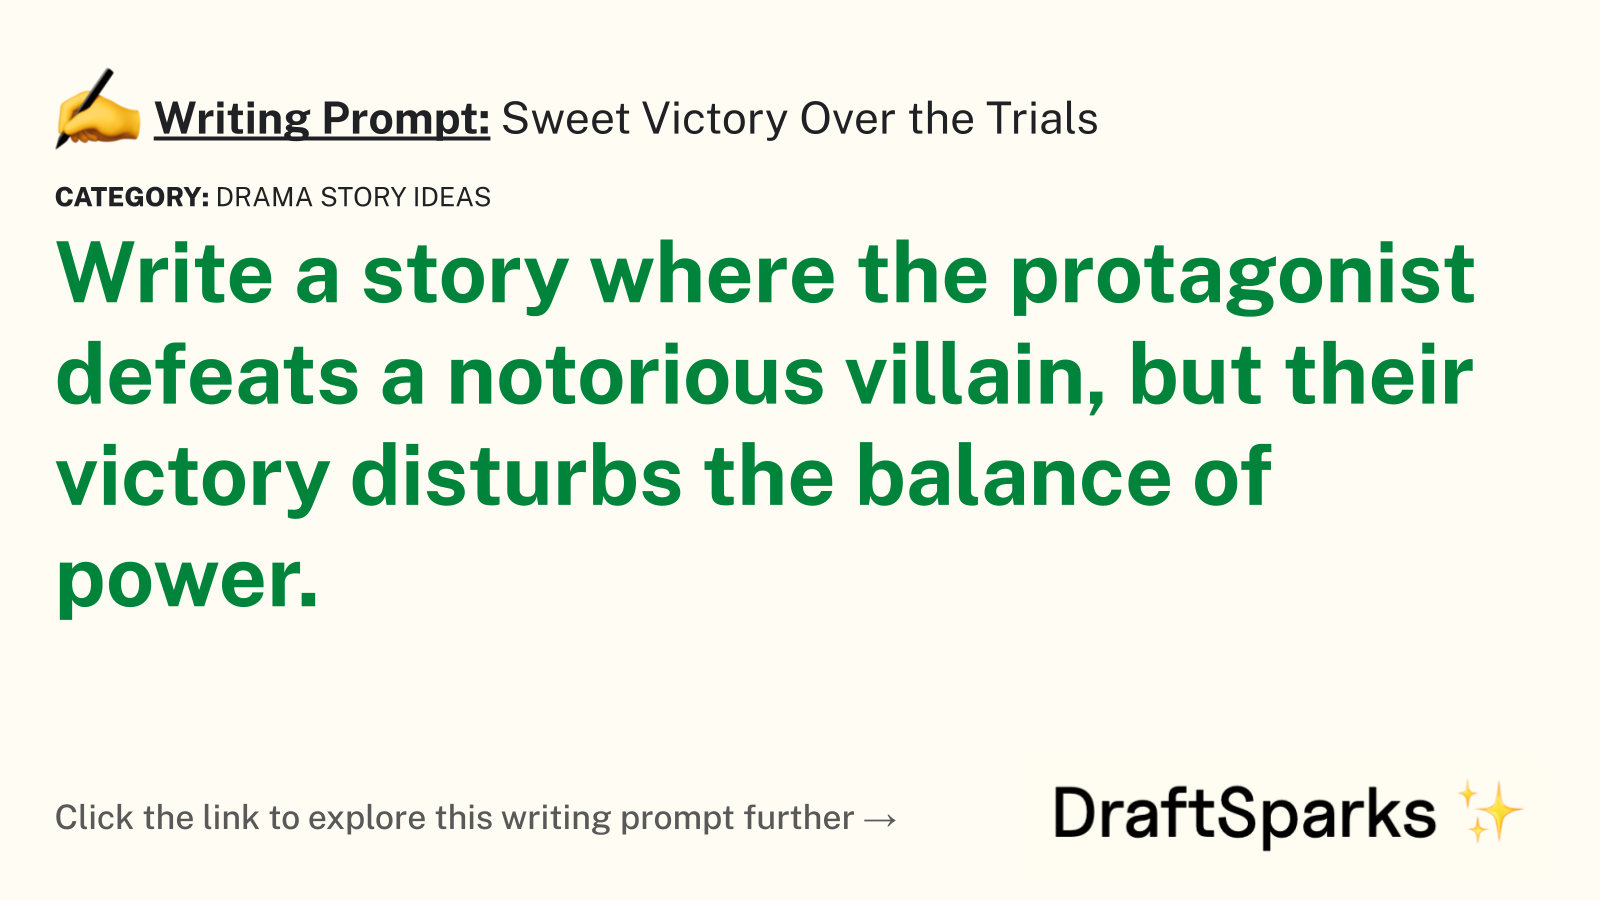 Sweet Victory Over the Trials